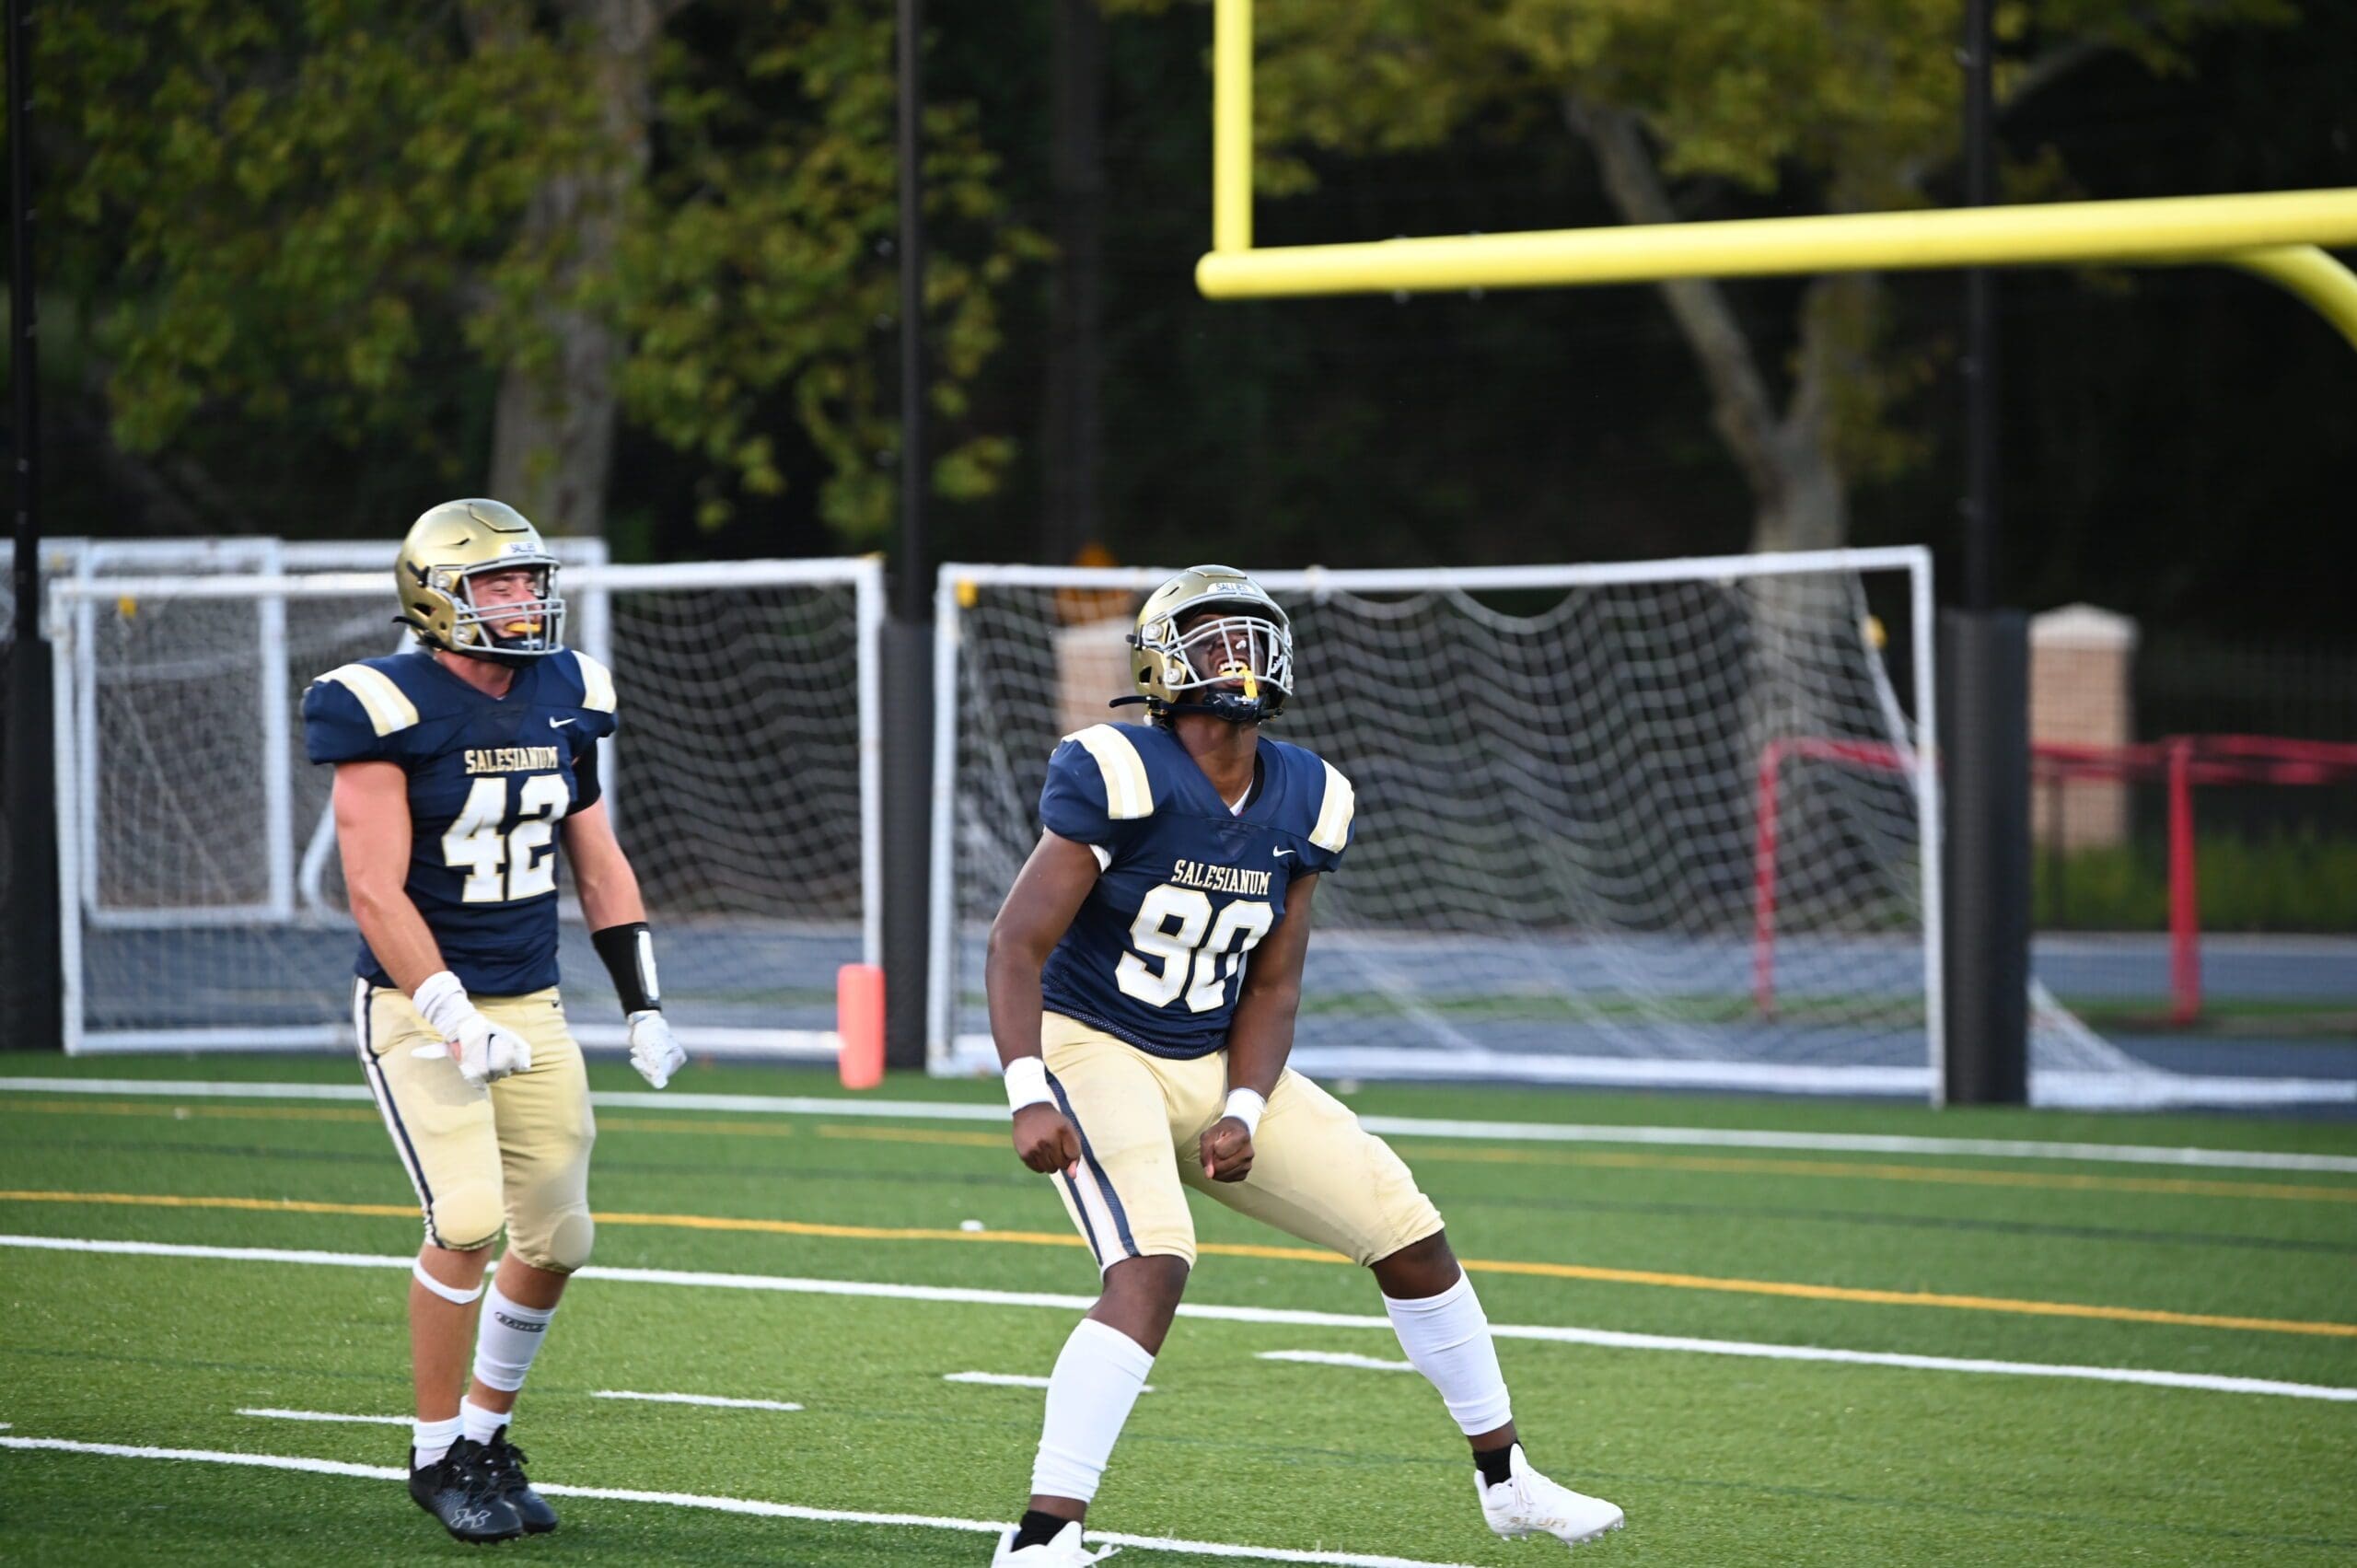 Featured image for “Salesianum defeats No. 1 Middletown”